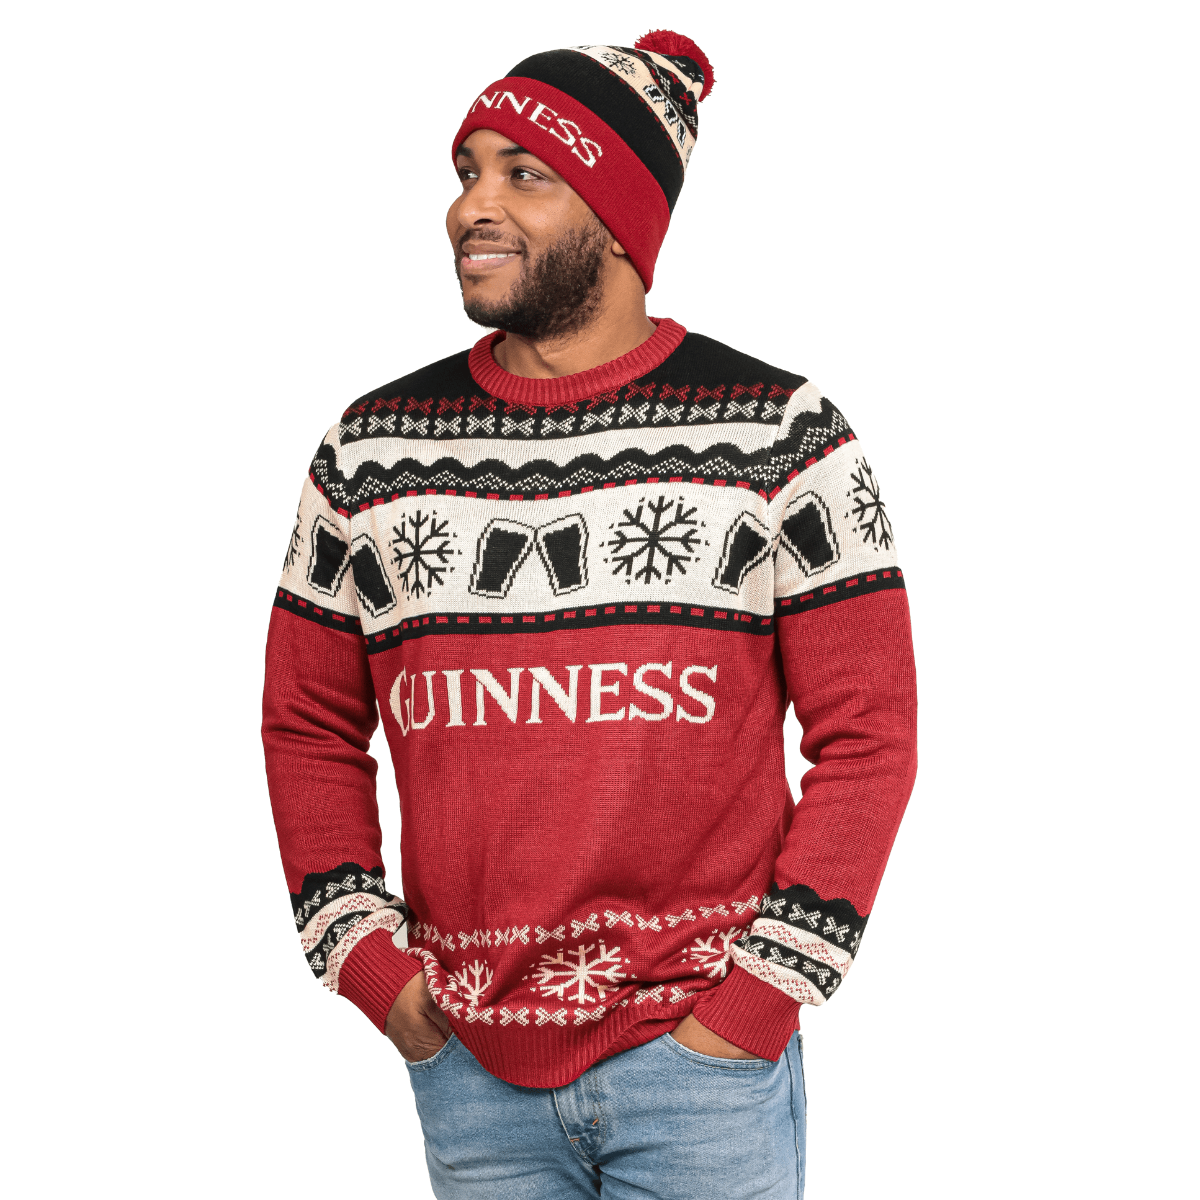 A man wearing a Guinness UK sweater and Official Pint Winter Beanie hat.